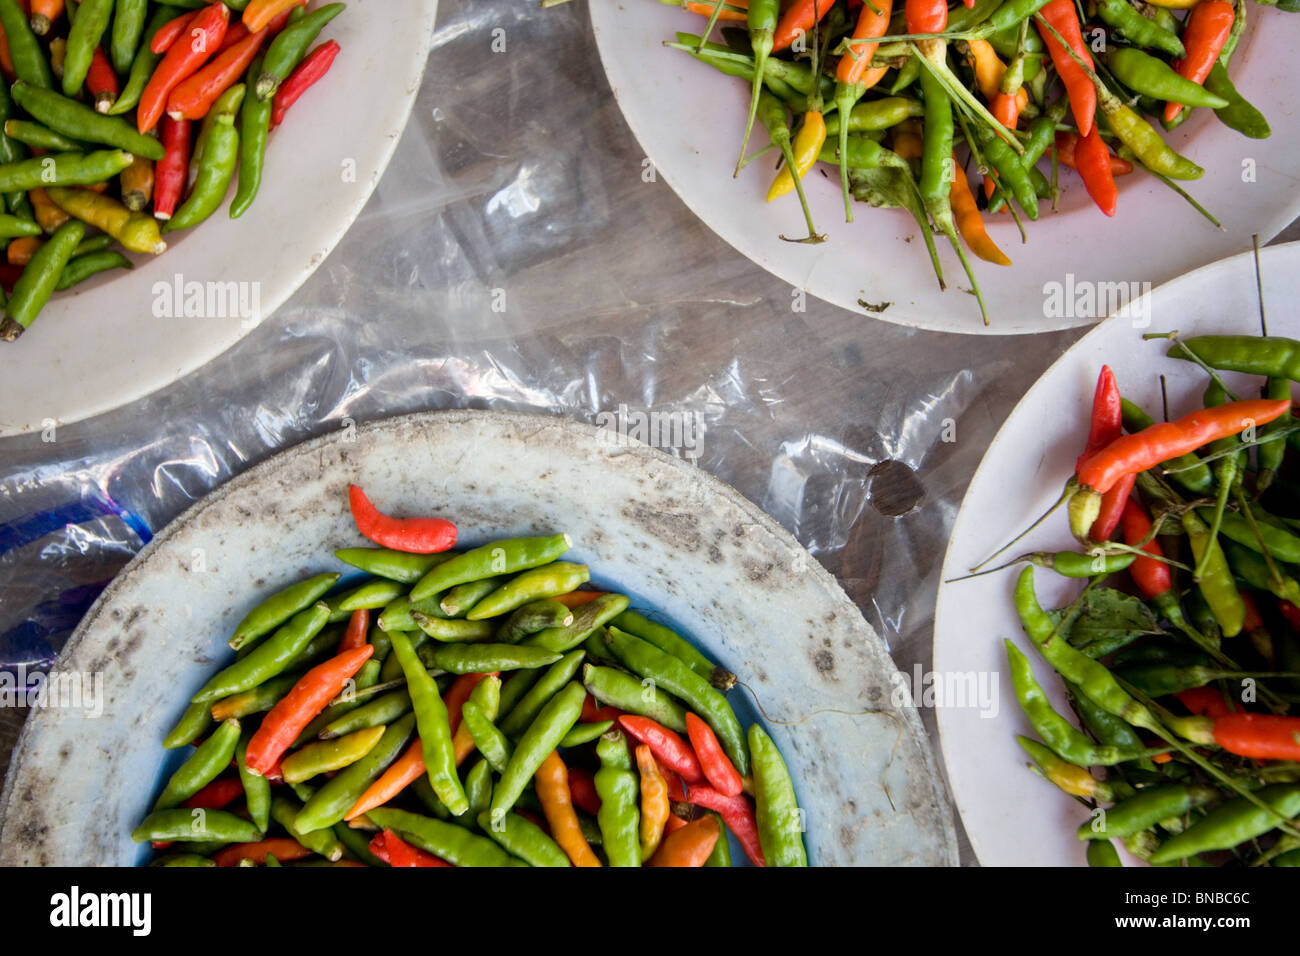 Plates of colourful green and red hot chillies in a market in Bangkok, Thailand Stock Photo